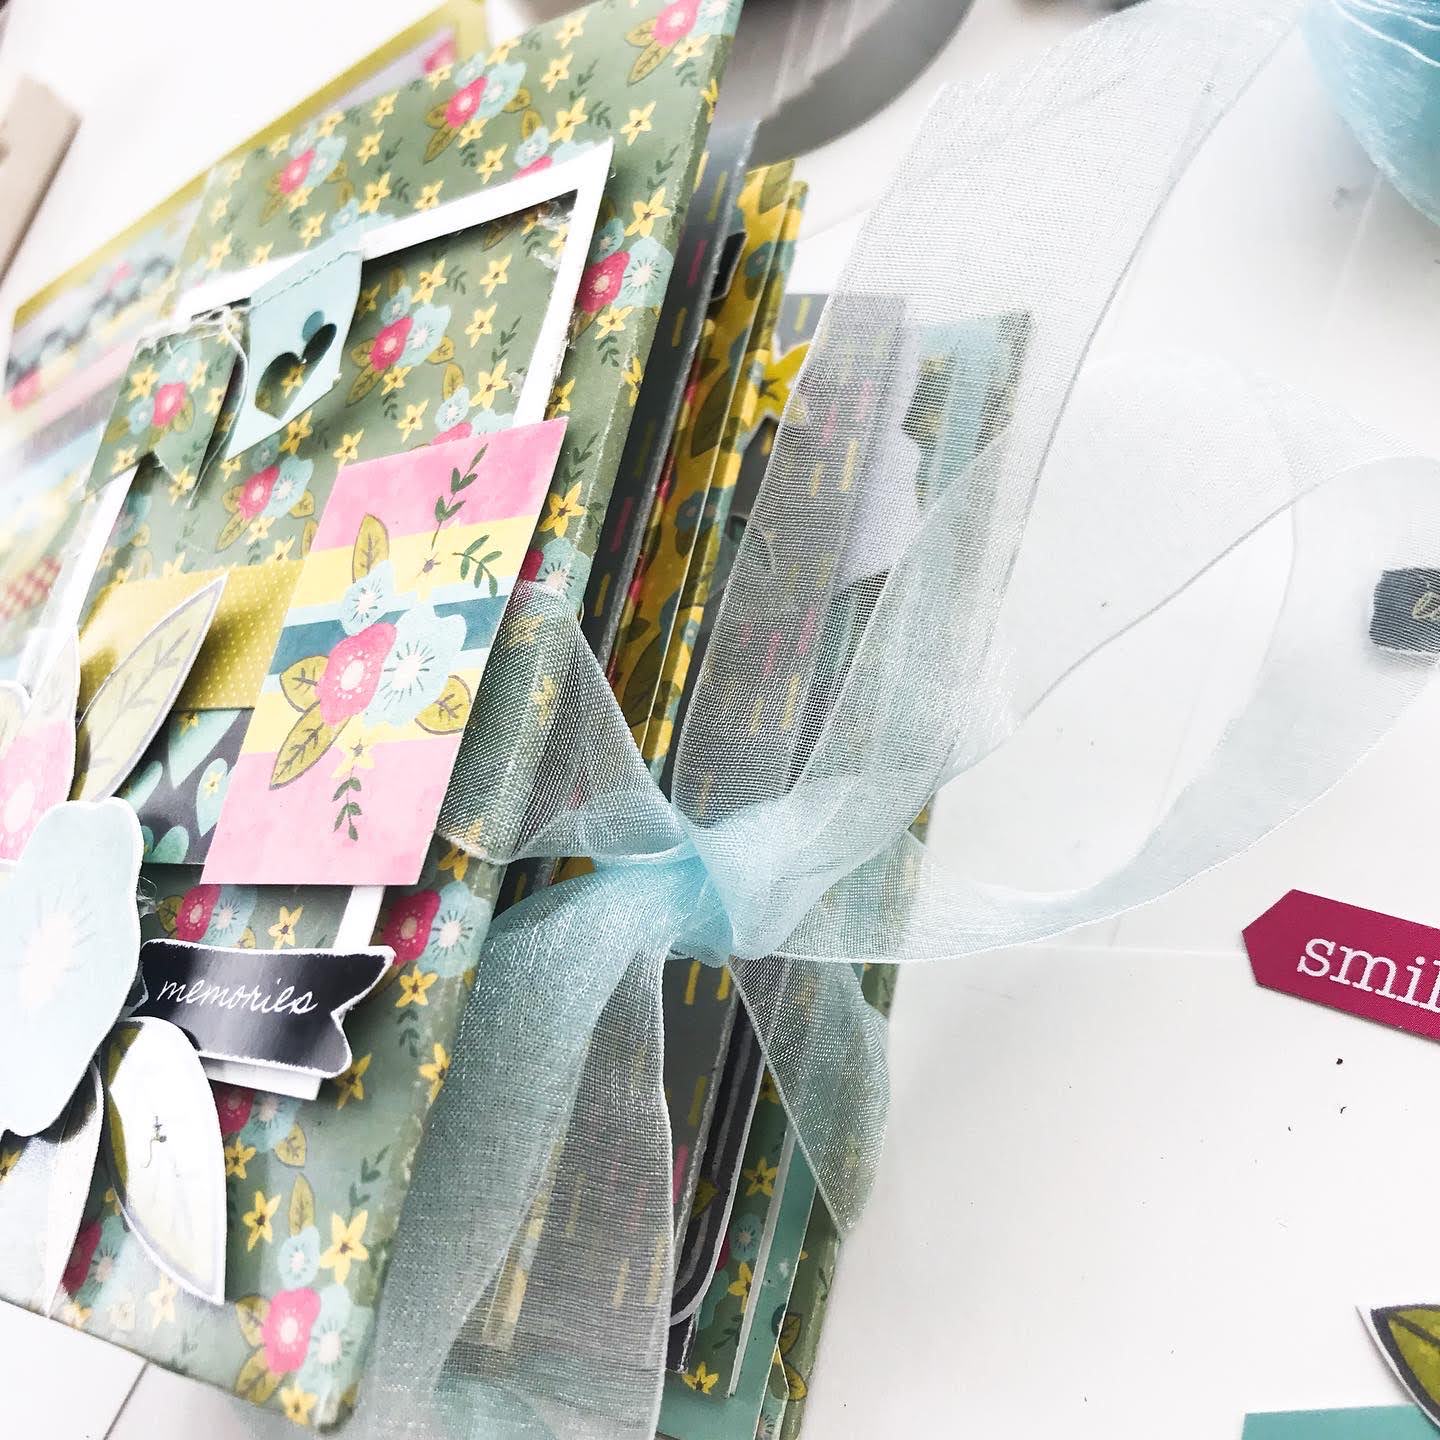 Kindness Craft Gift Tag with Glue and Watercolor - Laura Kelly's Inklings